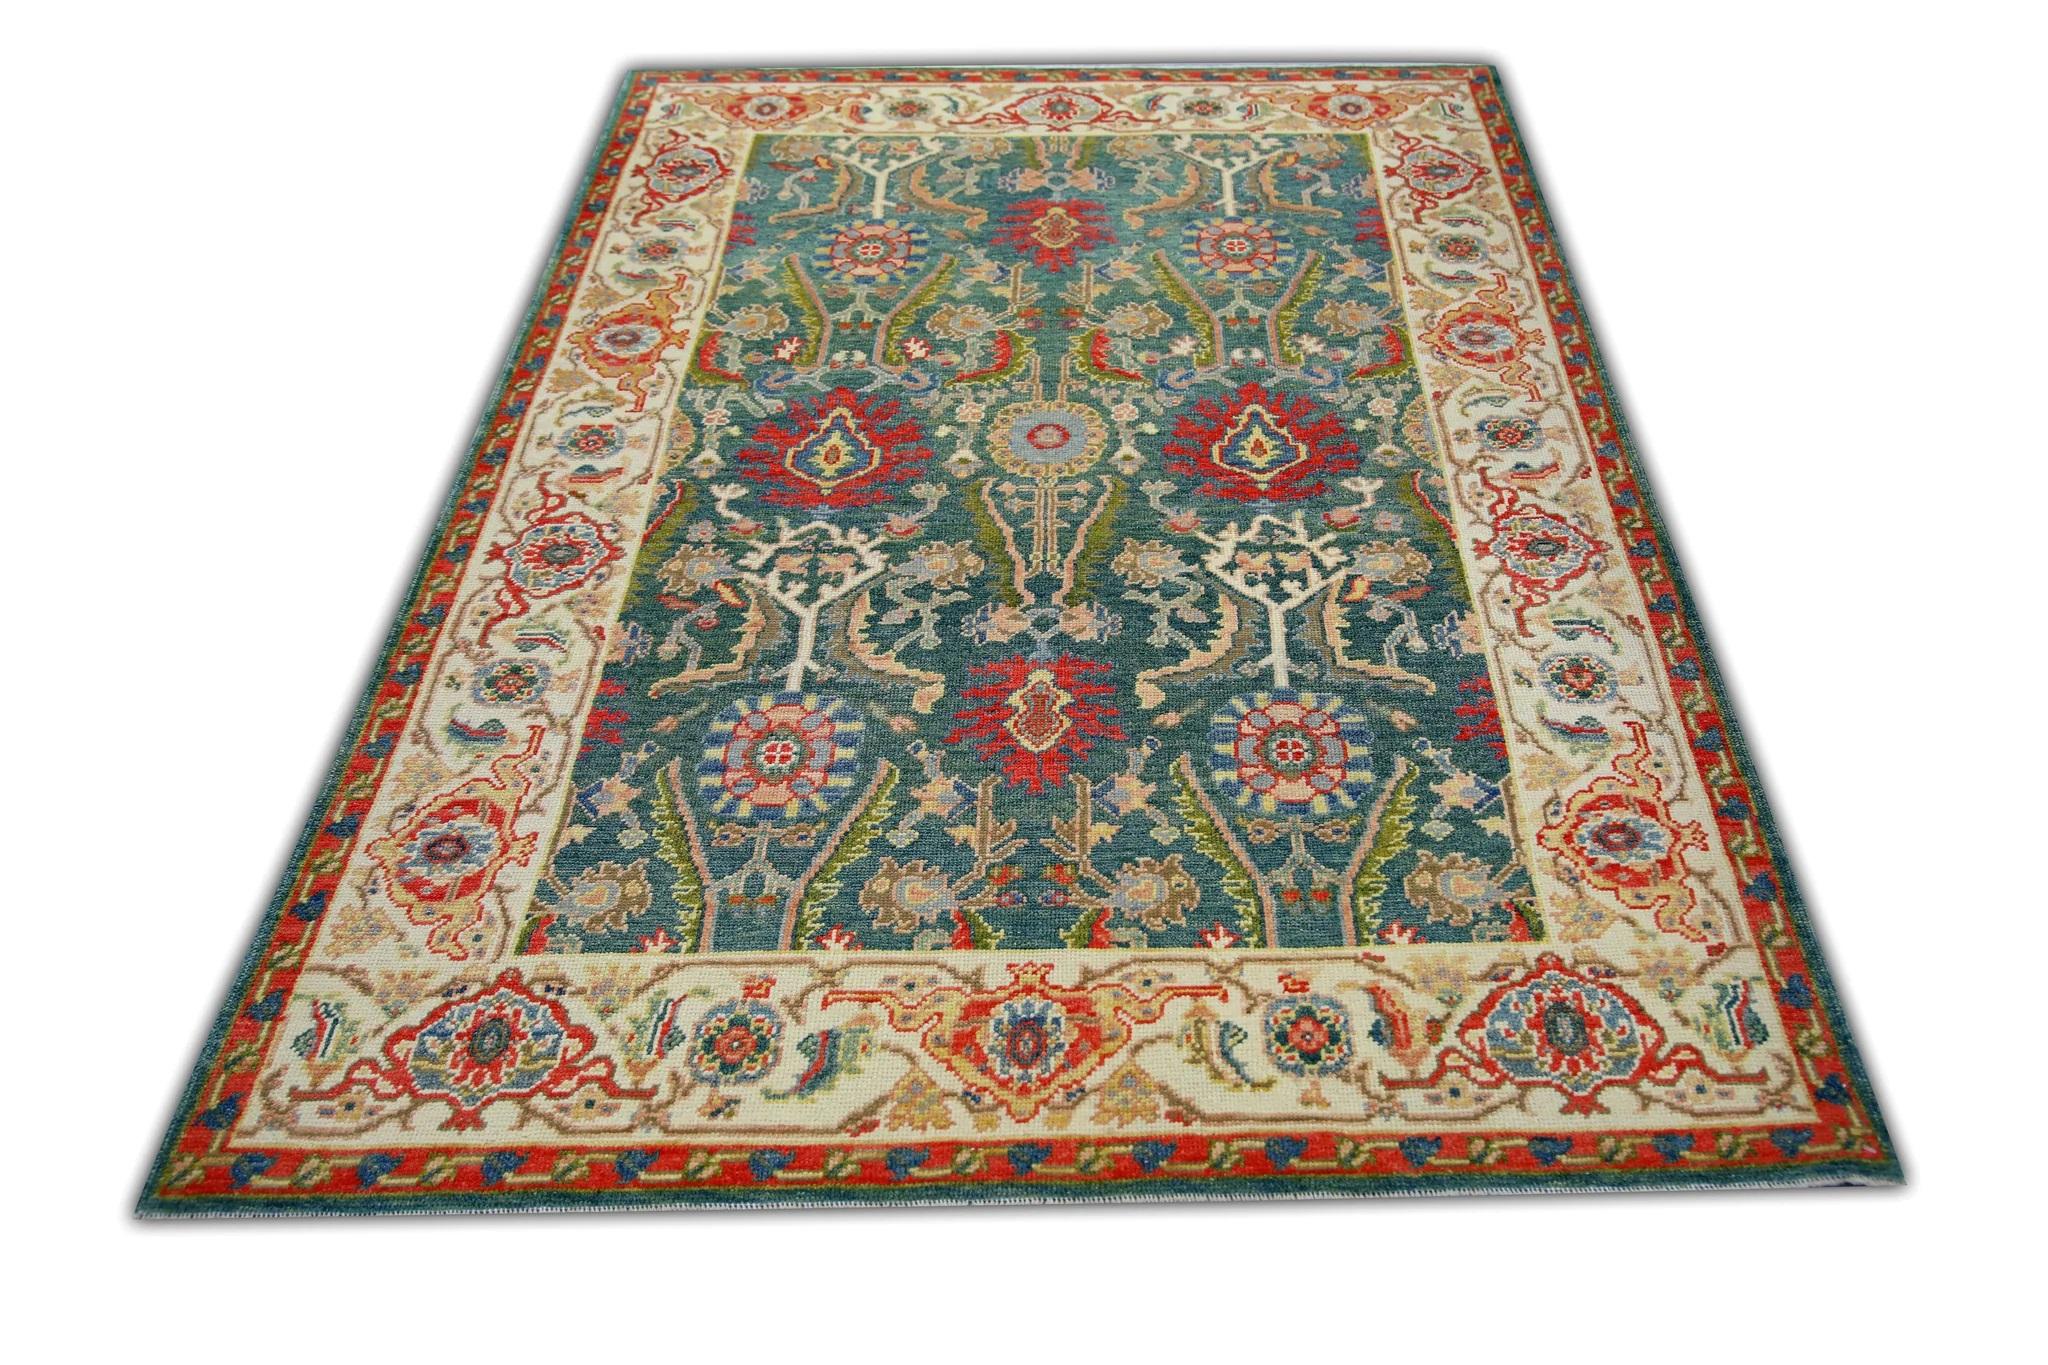 Contemporary Green & Red Floral Design Handwoven Wool Turkish Finewoven Oushak Rug 4'3 x 6'7 For Sale